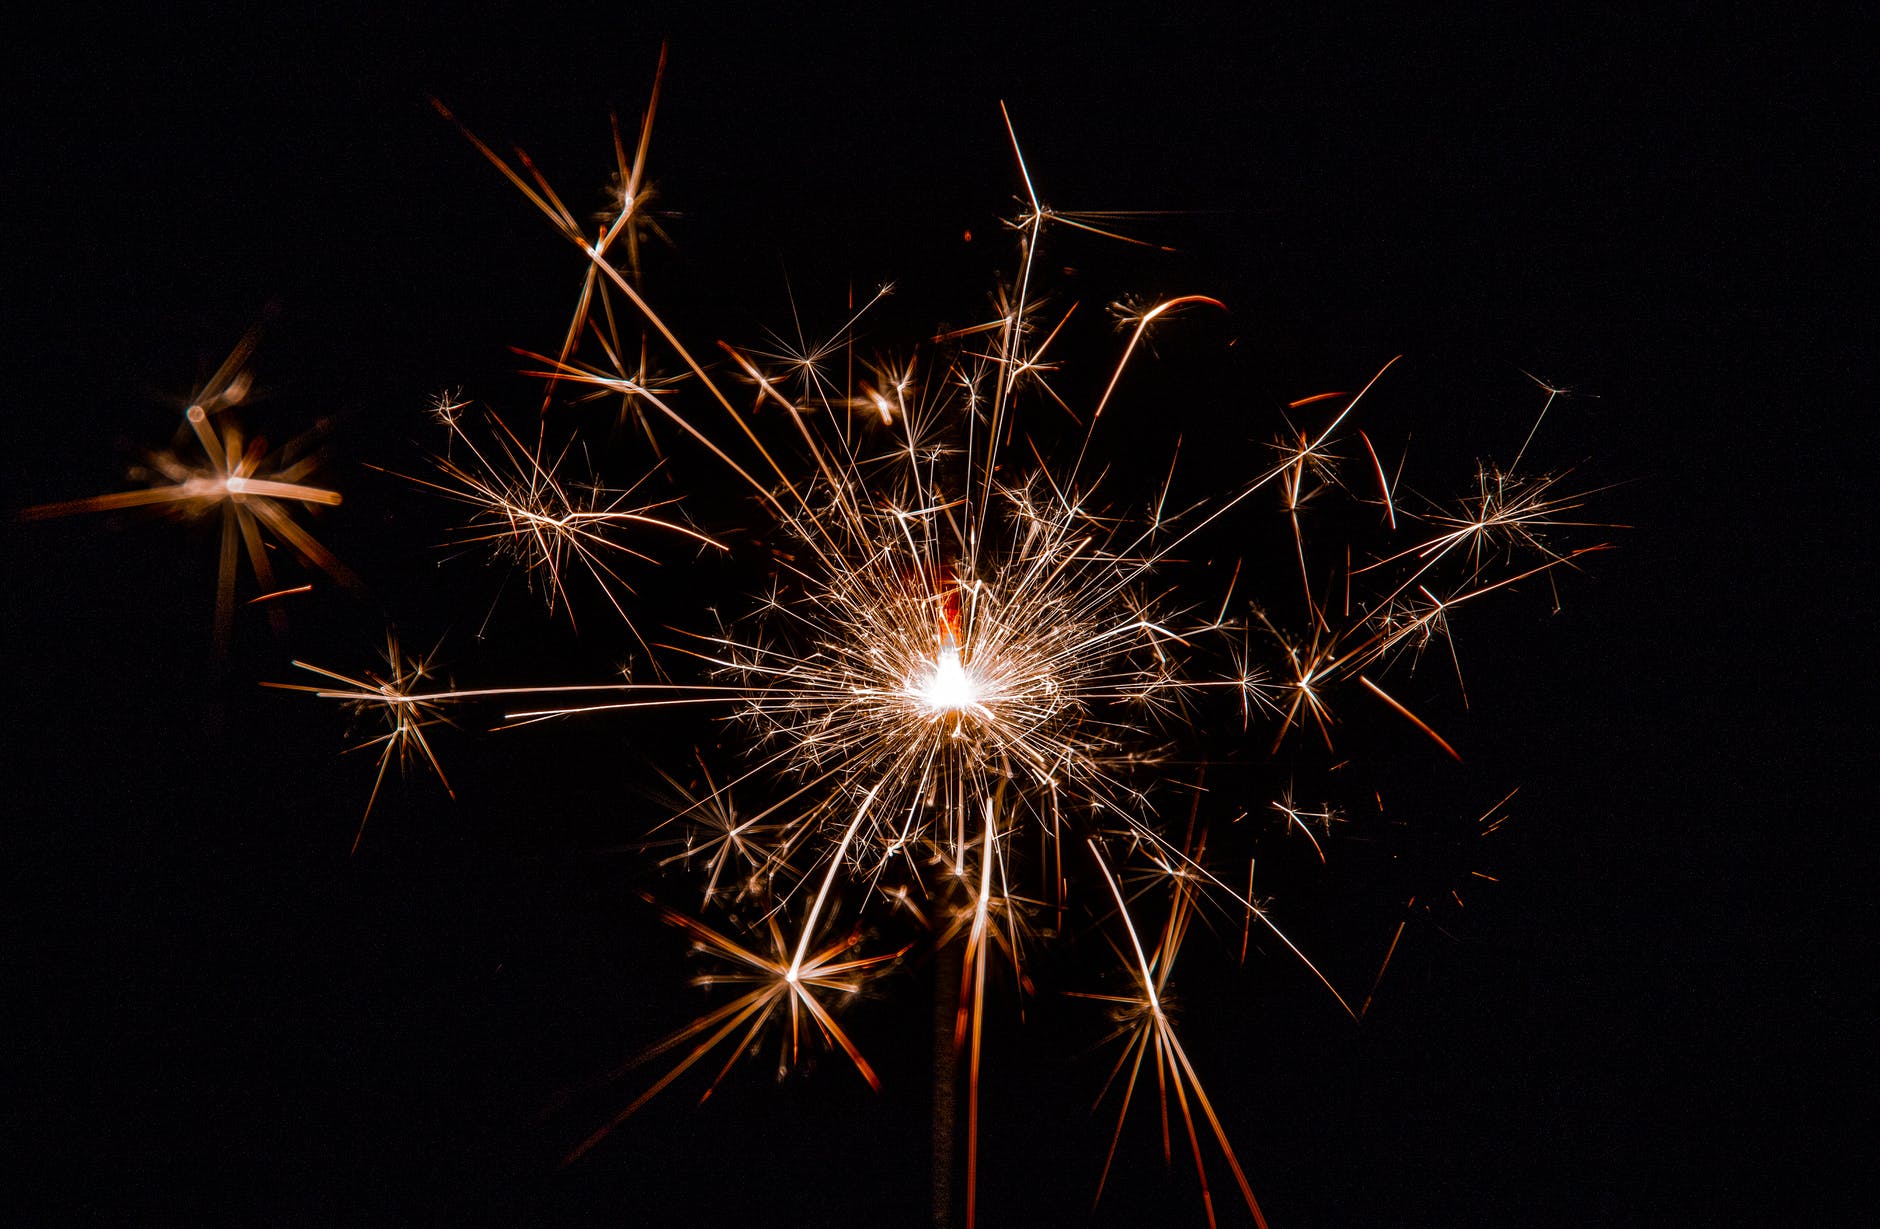 low light photography of firecrackers